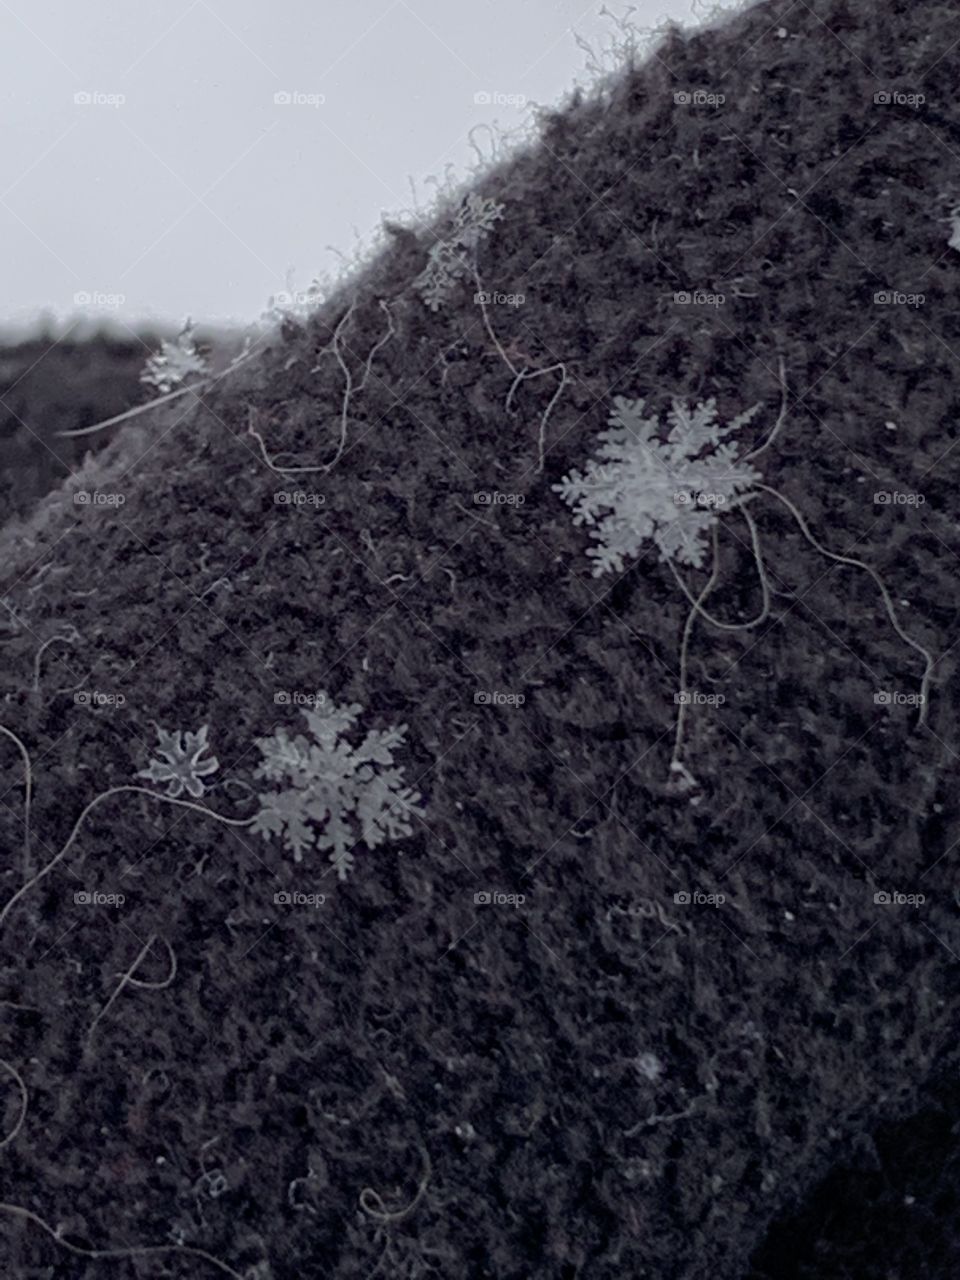 Clear pictures of snowflakes on fuzzy black gloves